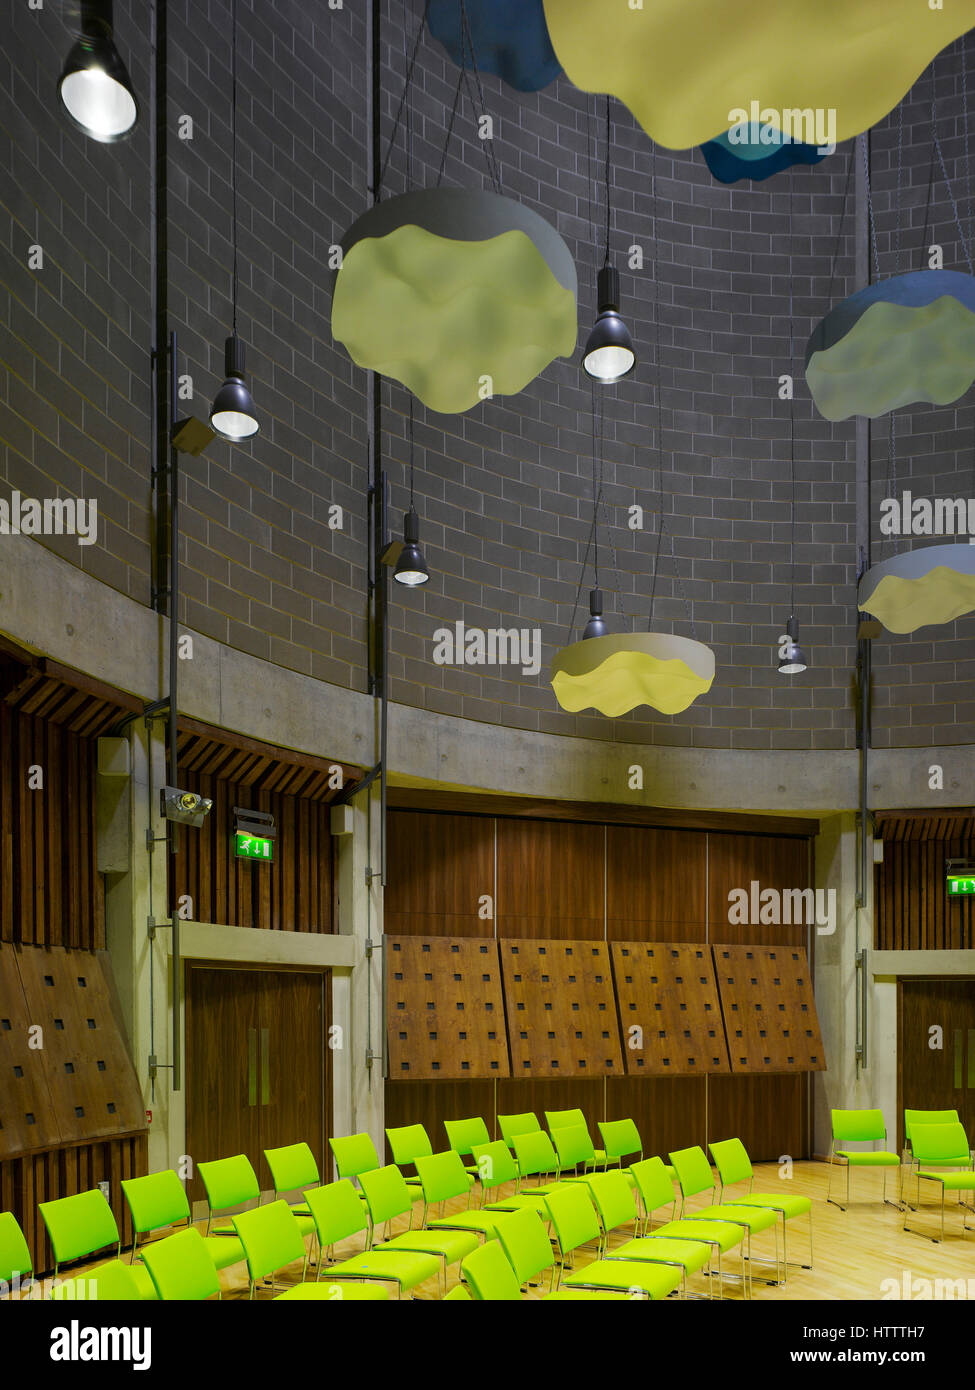 View of drum interior showing accoustic baffles in place. Irish World Academy of Music and Dance, Limerick, Ireland. Architect: Daniel Cordier, 2010. Stock Photo